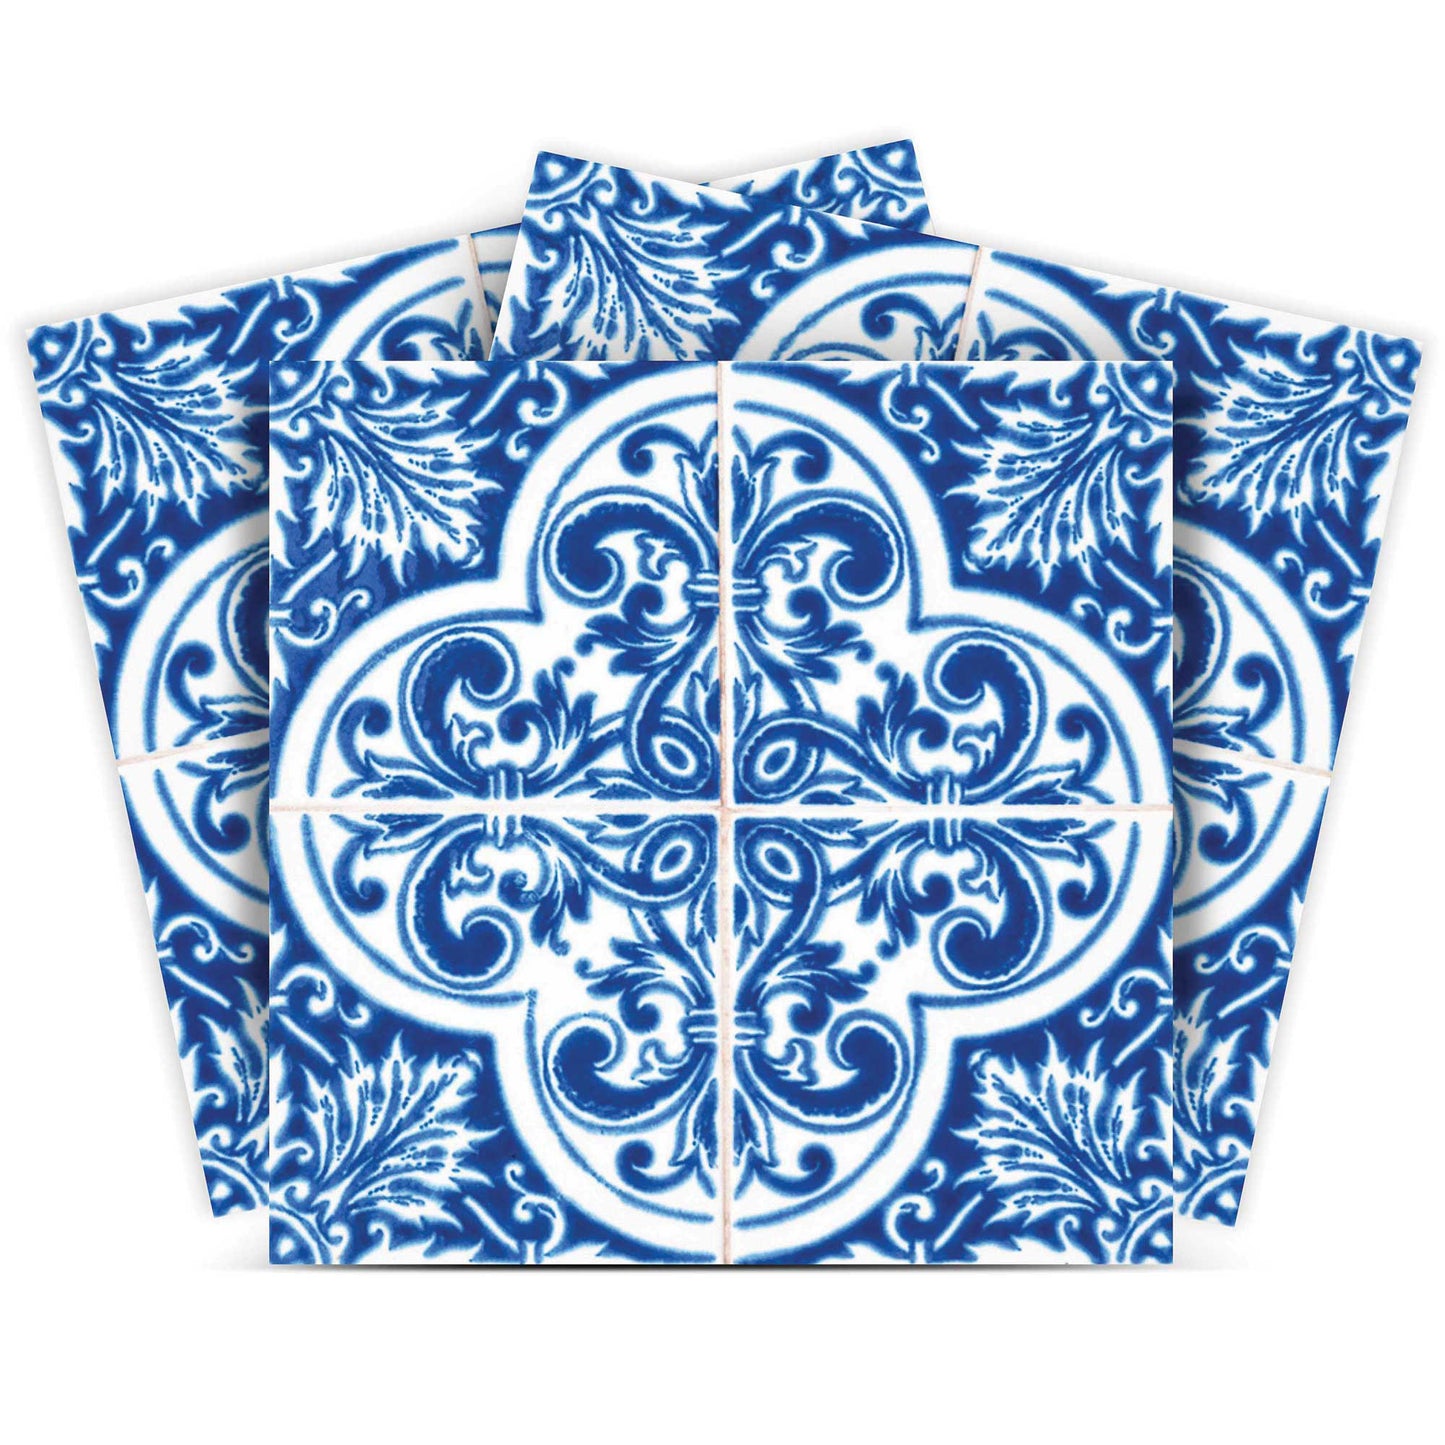 8" X 8" Blue and White Cross Peel And Stick Tiles